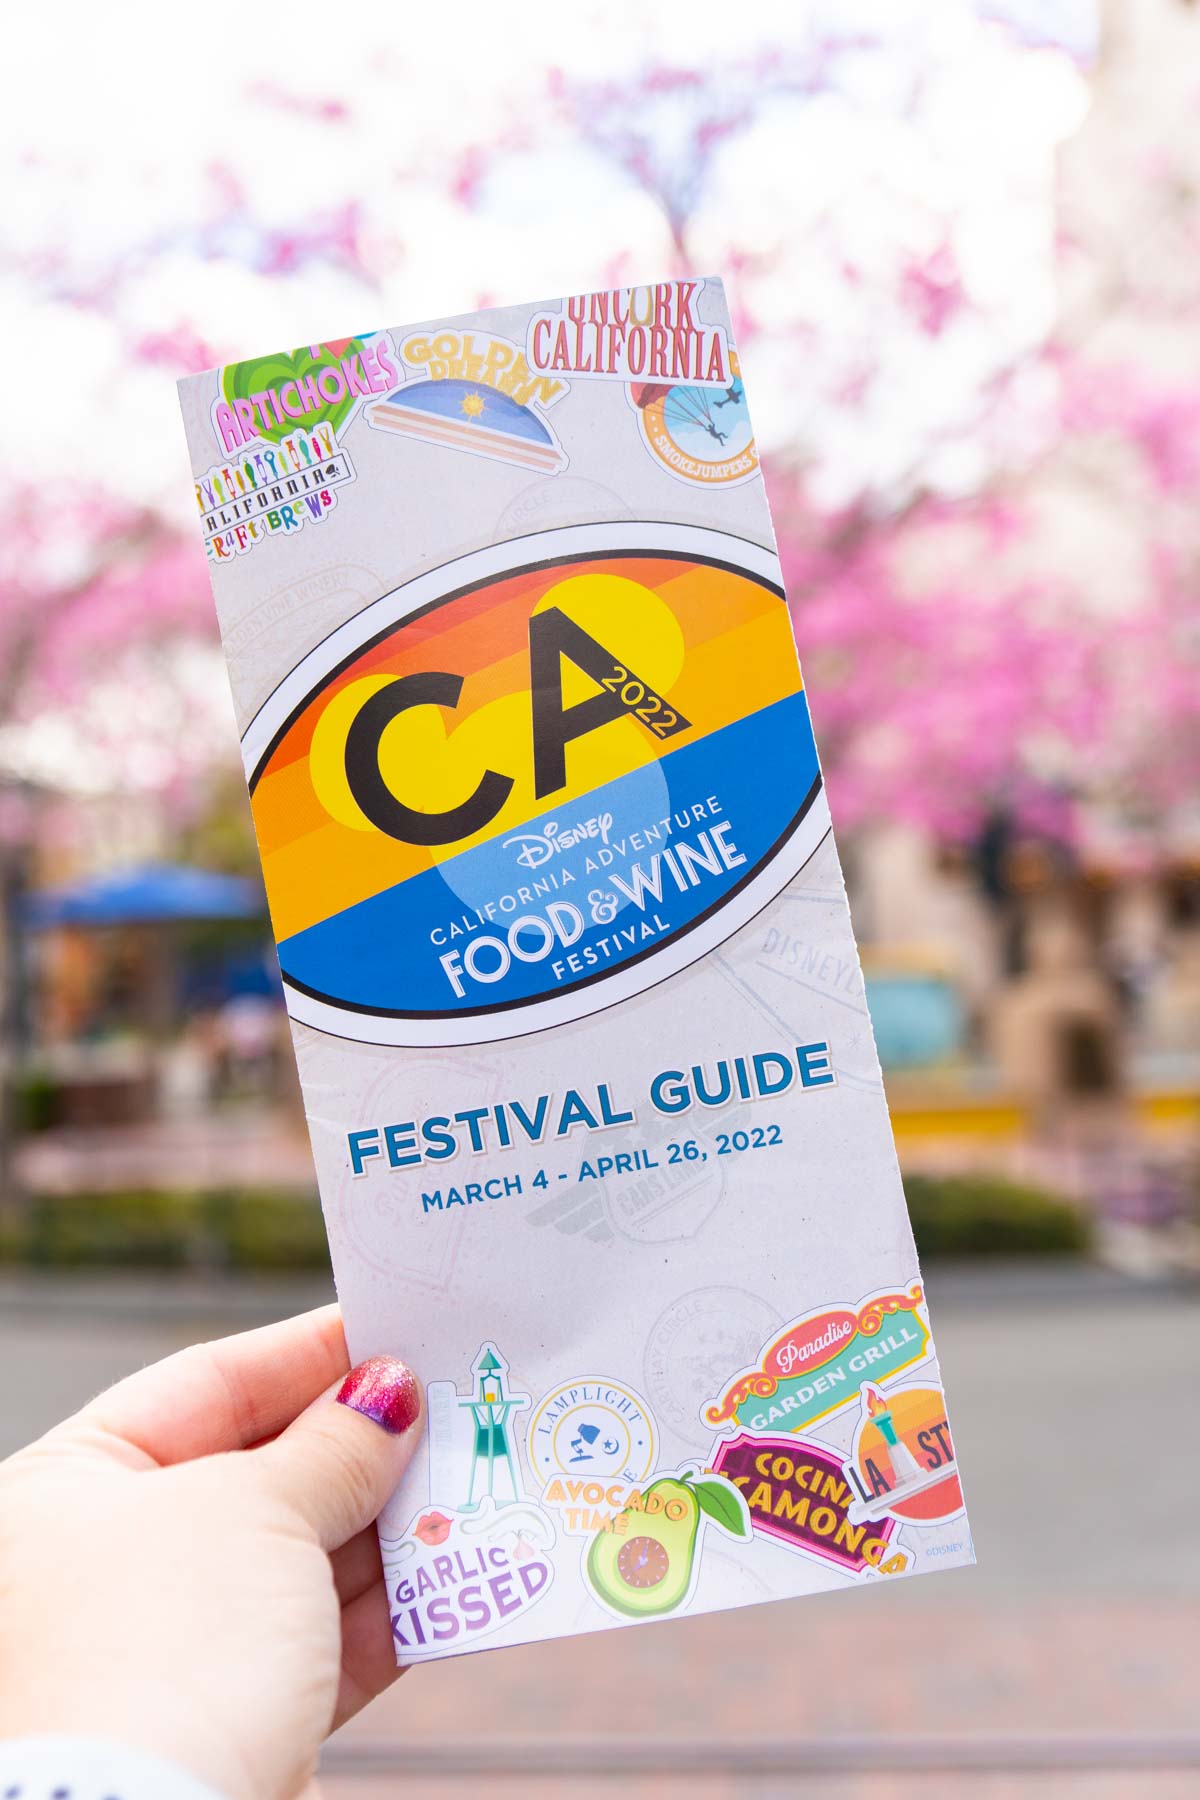 Festival guide for the DIsneyland Food and Wine Festival in 2022